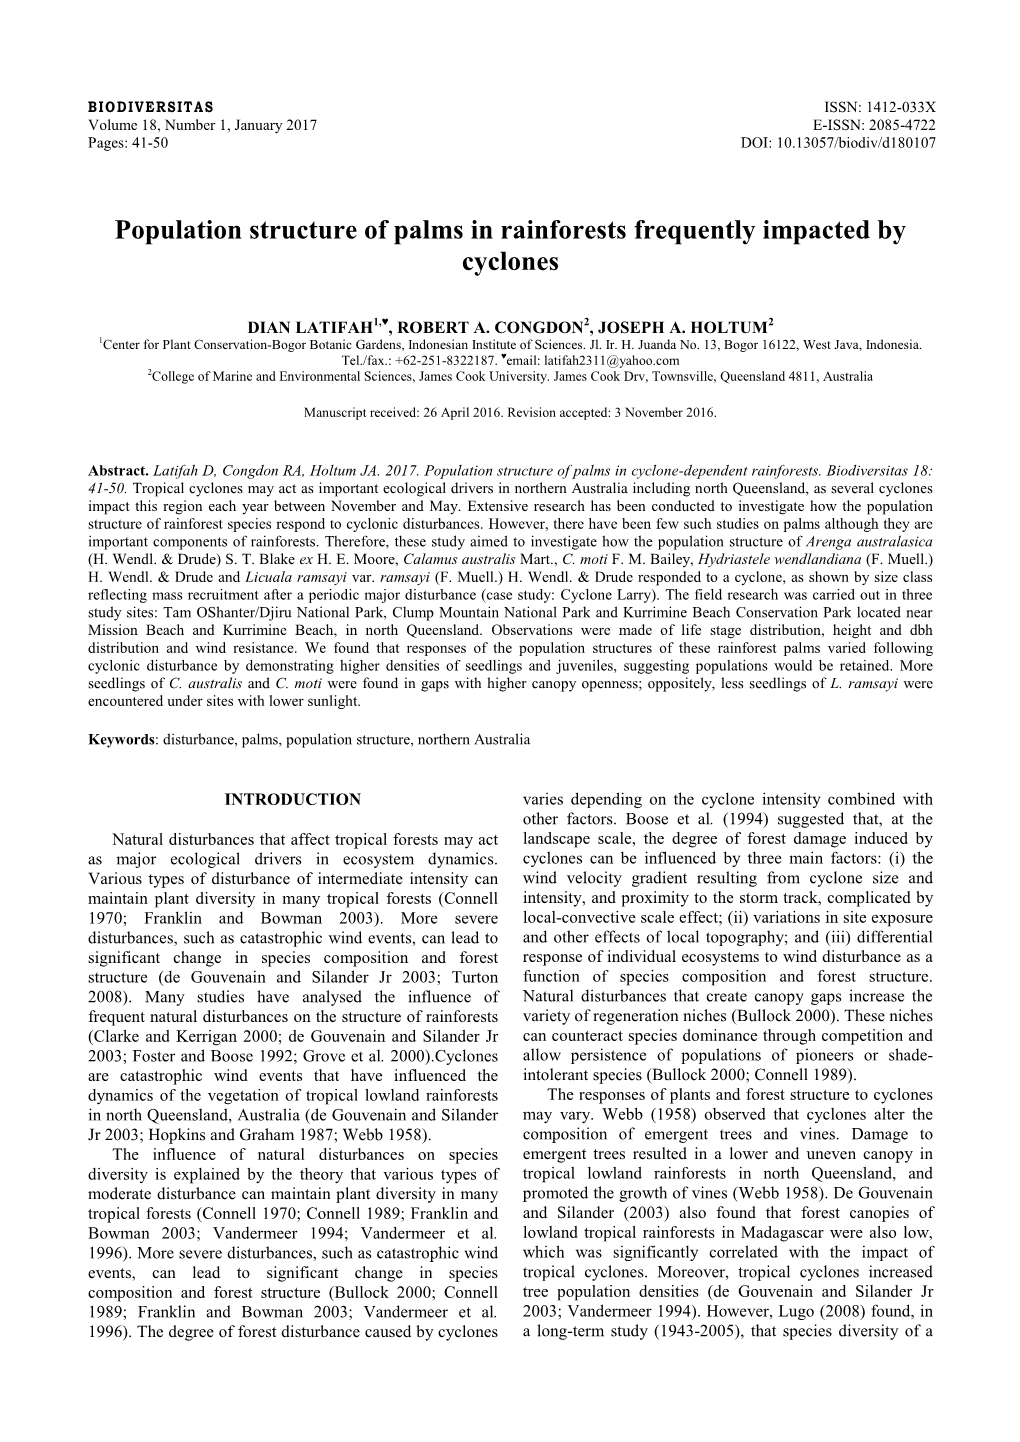 Population Structure of Palms in Rainforests Frequently Impacted by Cyclones